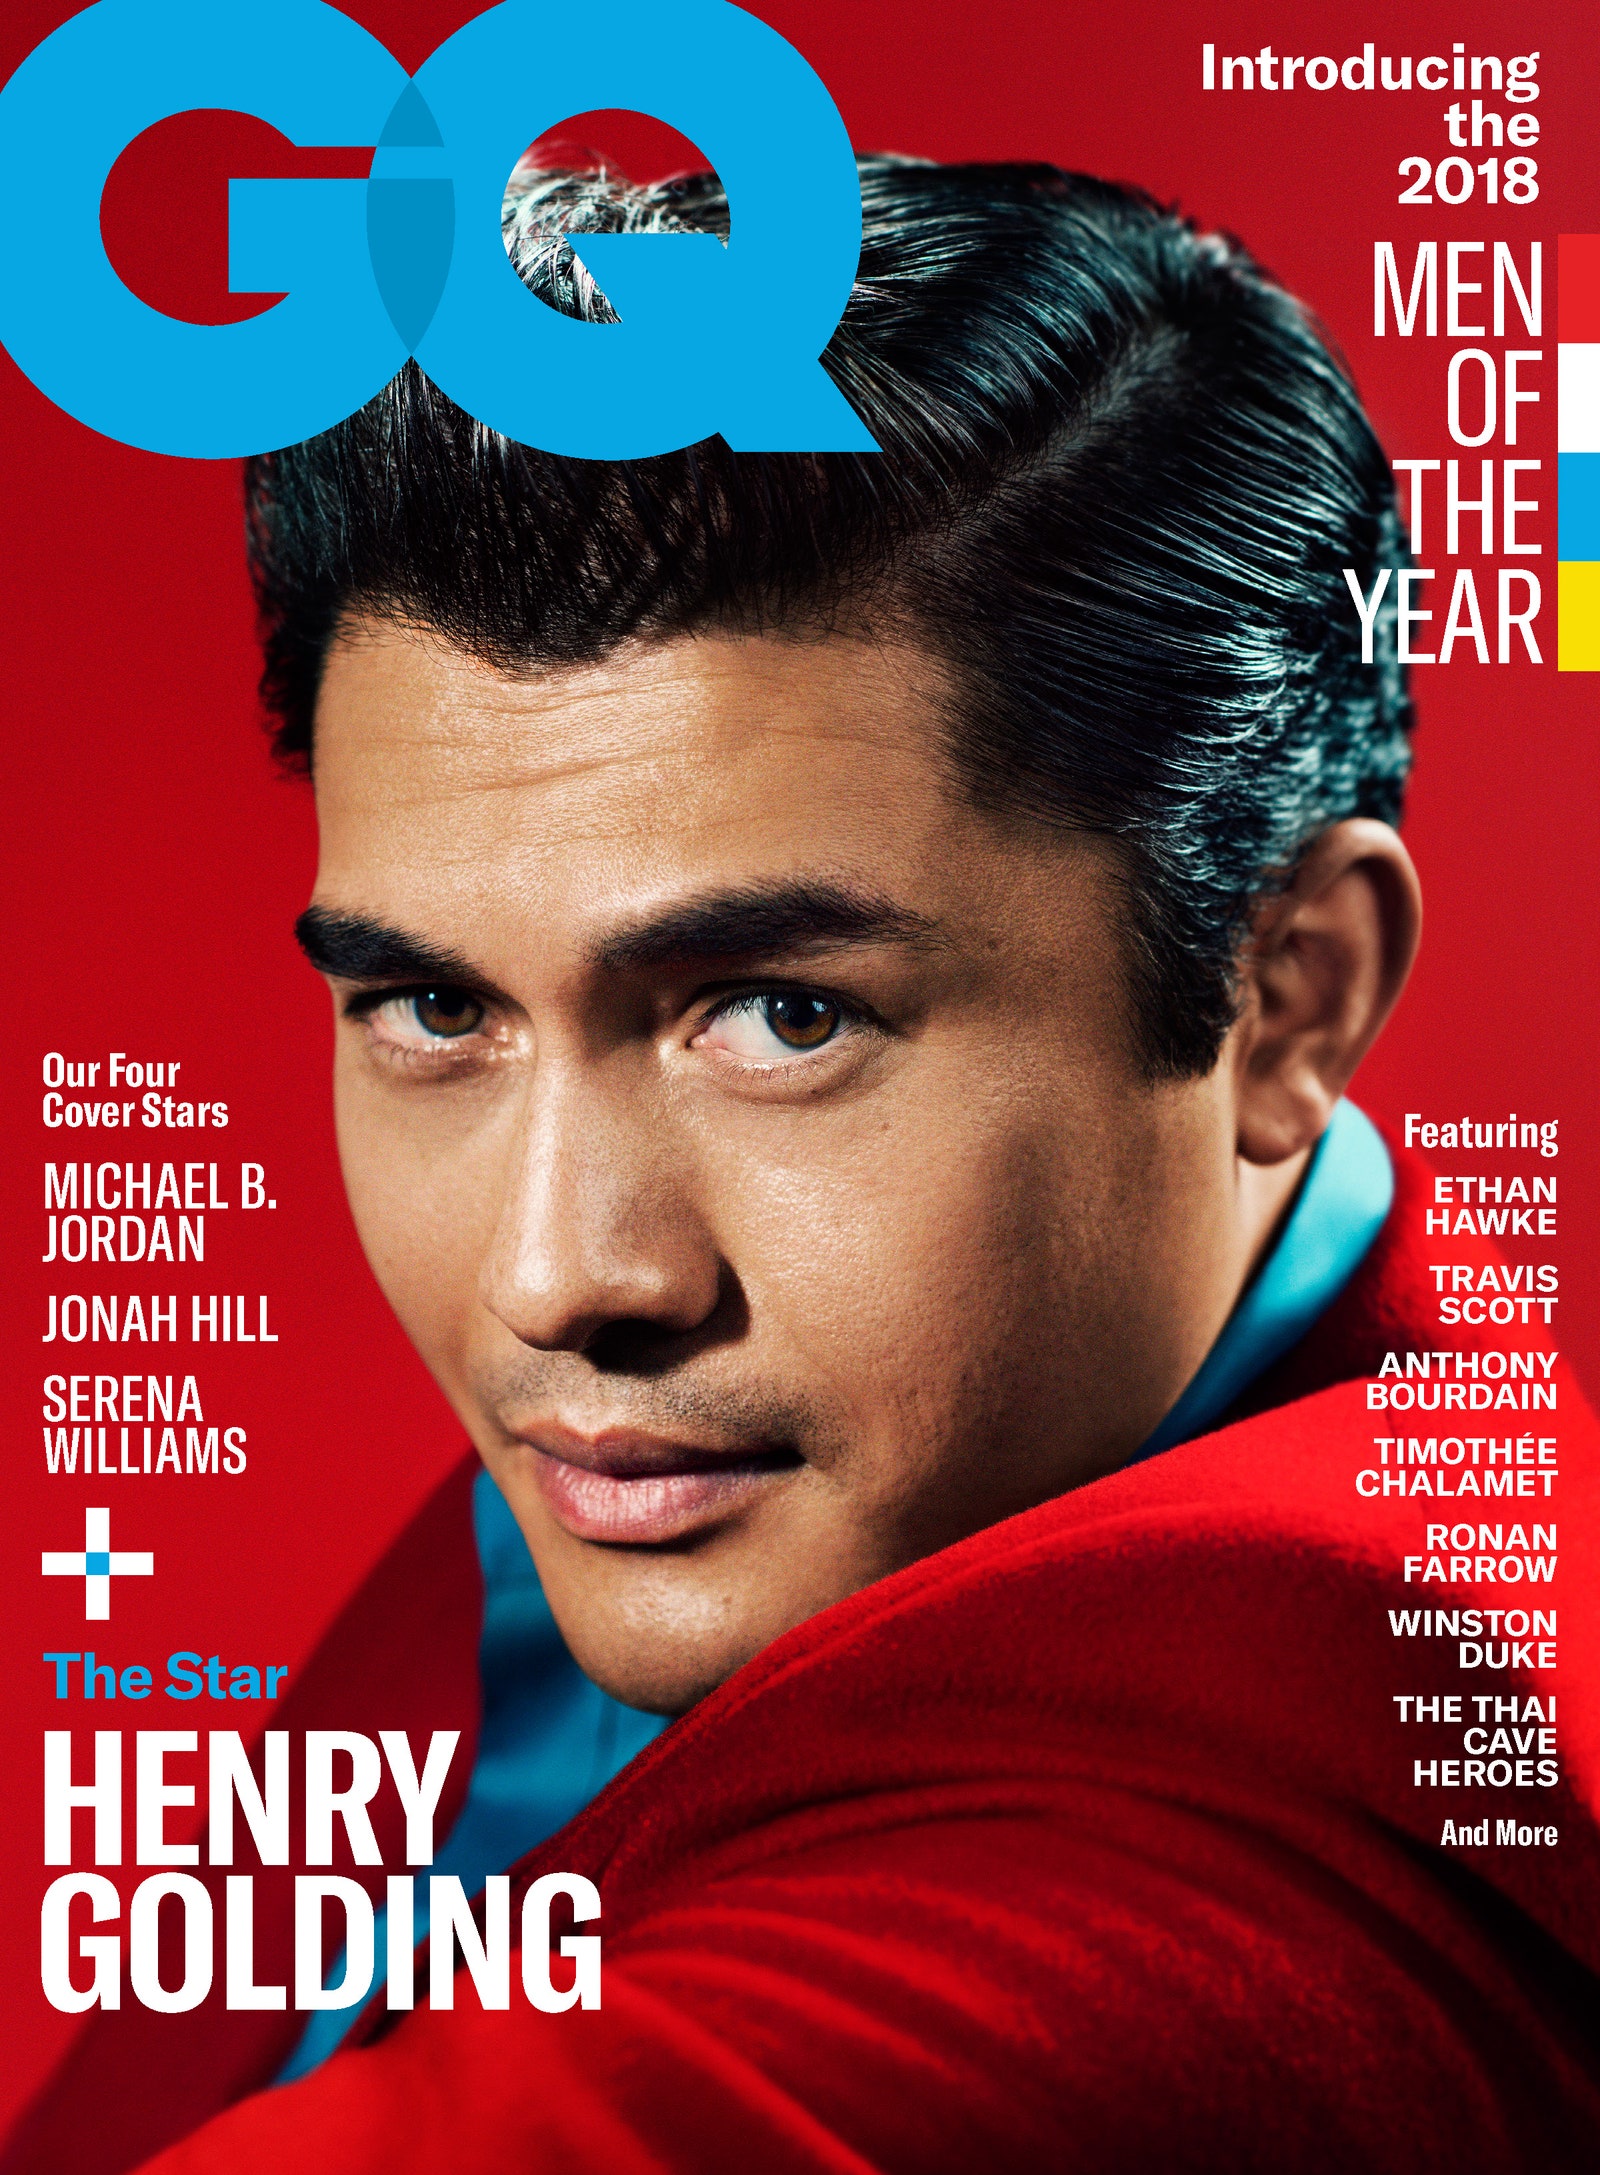 Henry Golding on the cover of GQ Magazine, Photographed by PARI DUKOVIC